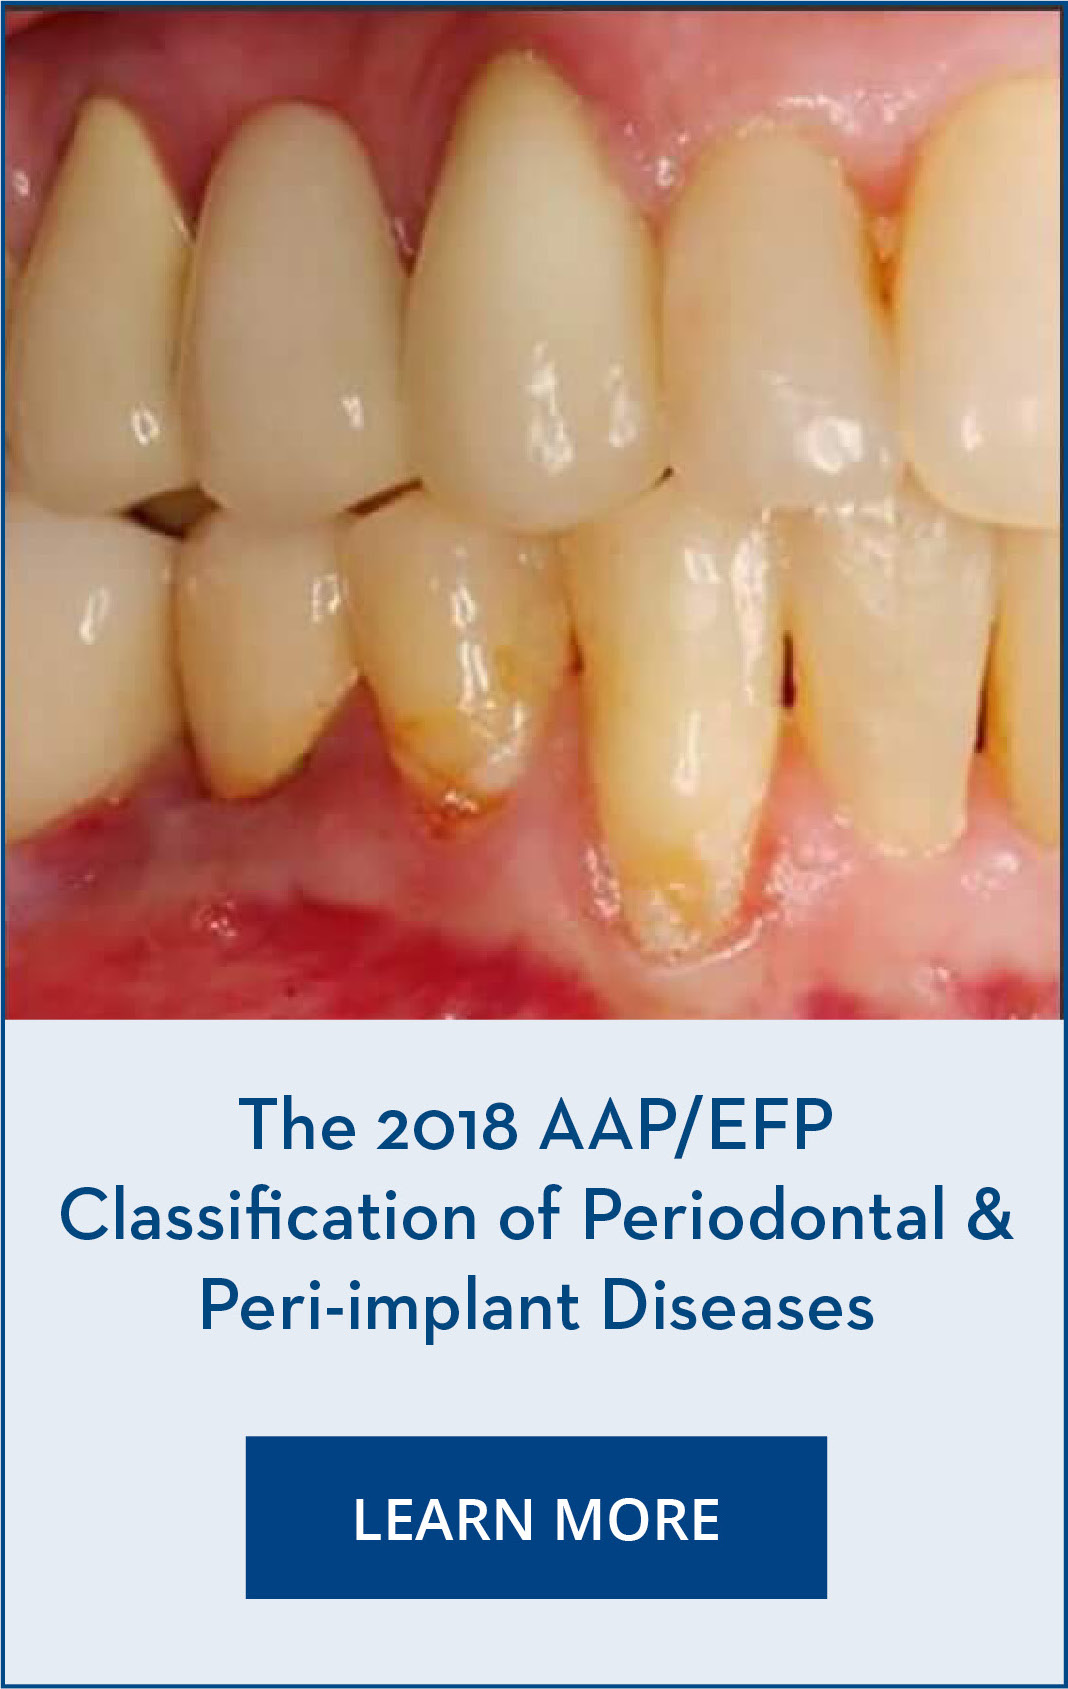 [EN] - Generic Page - Implementing the AAP/EFP periodontal classification image layout 2